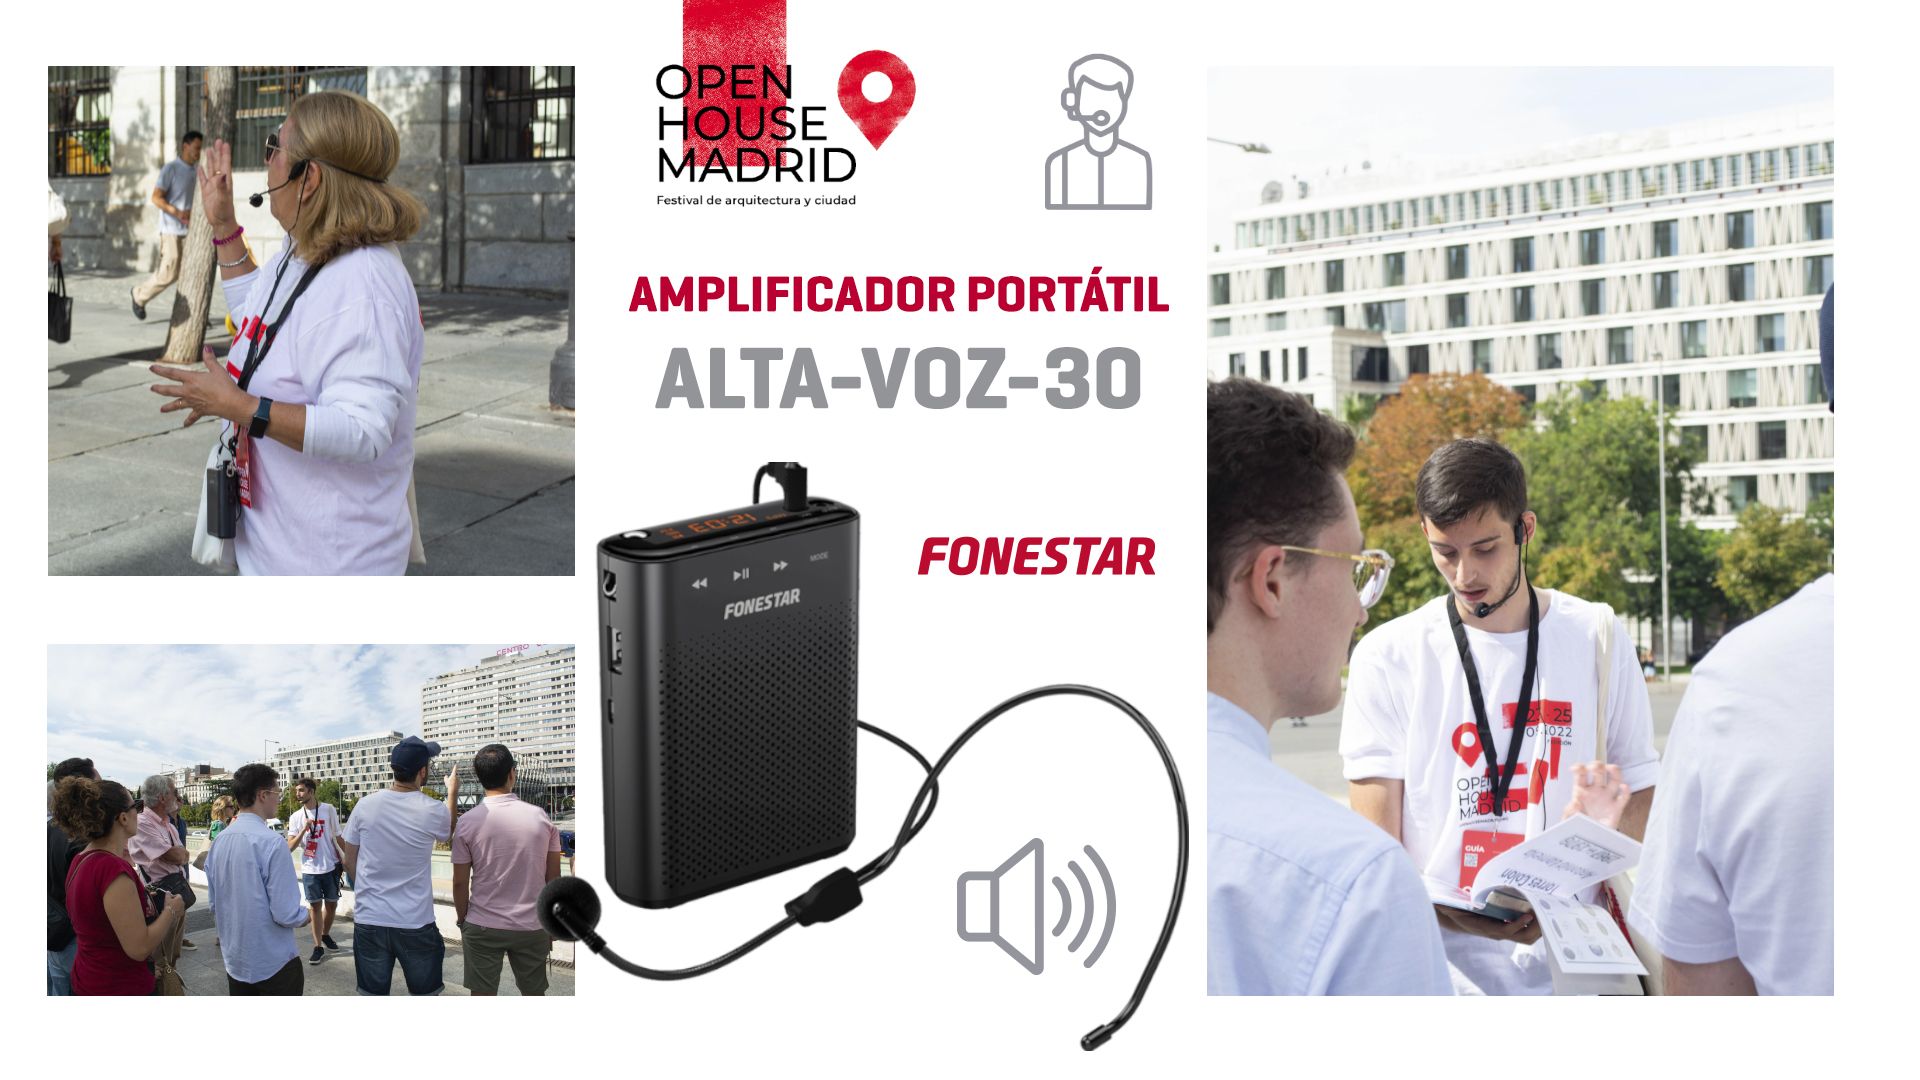 Our portable amplifier ALTA-VOZ-30 protagonist at Open House Madrid